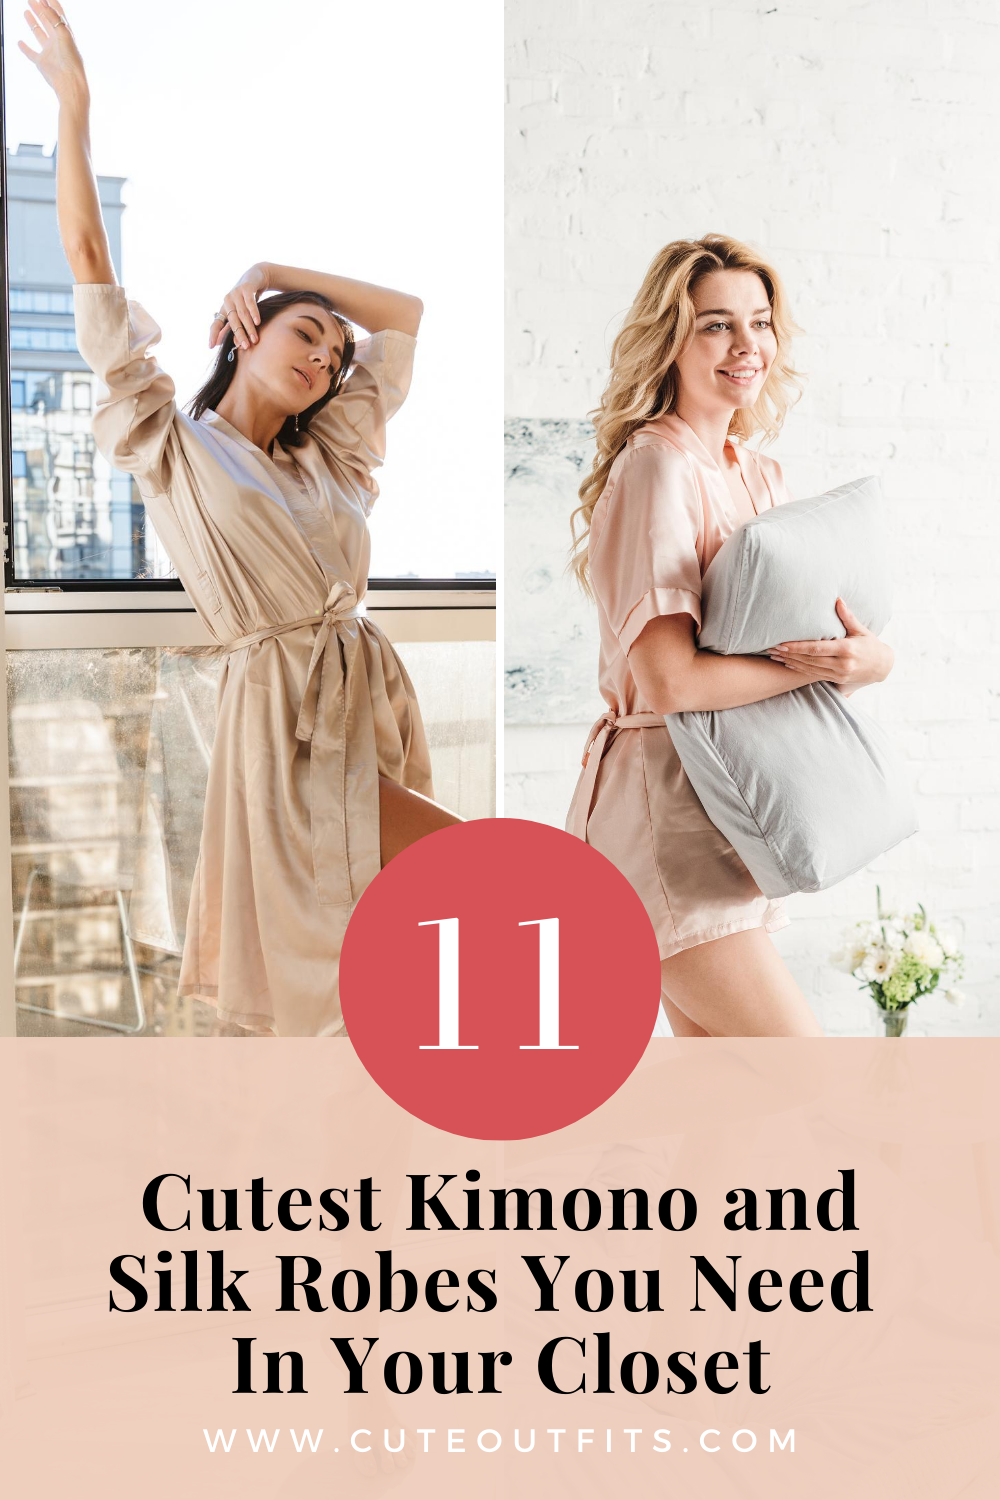 placard | 11 Cutest Kimono and Silk Robes You Need In Your Closet